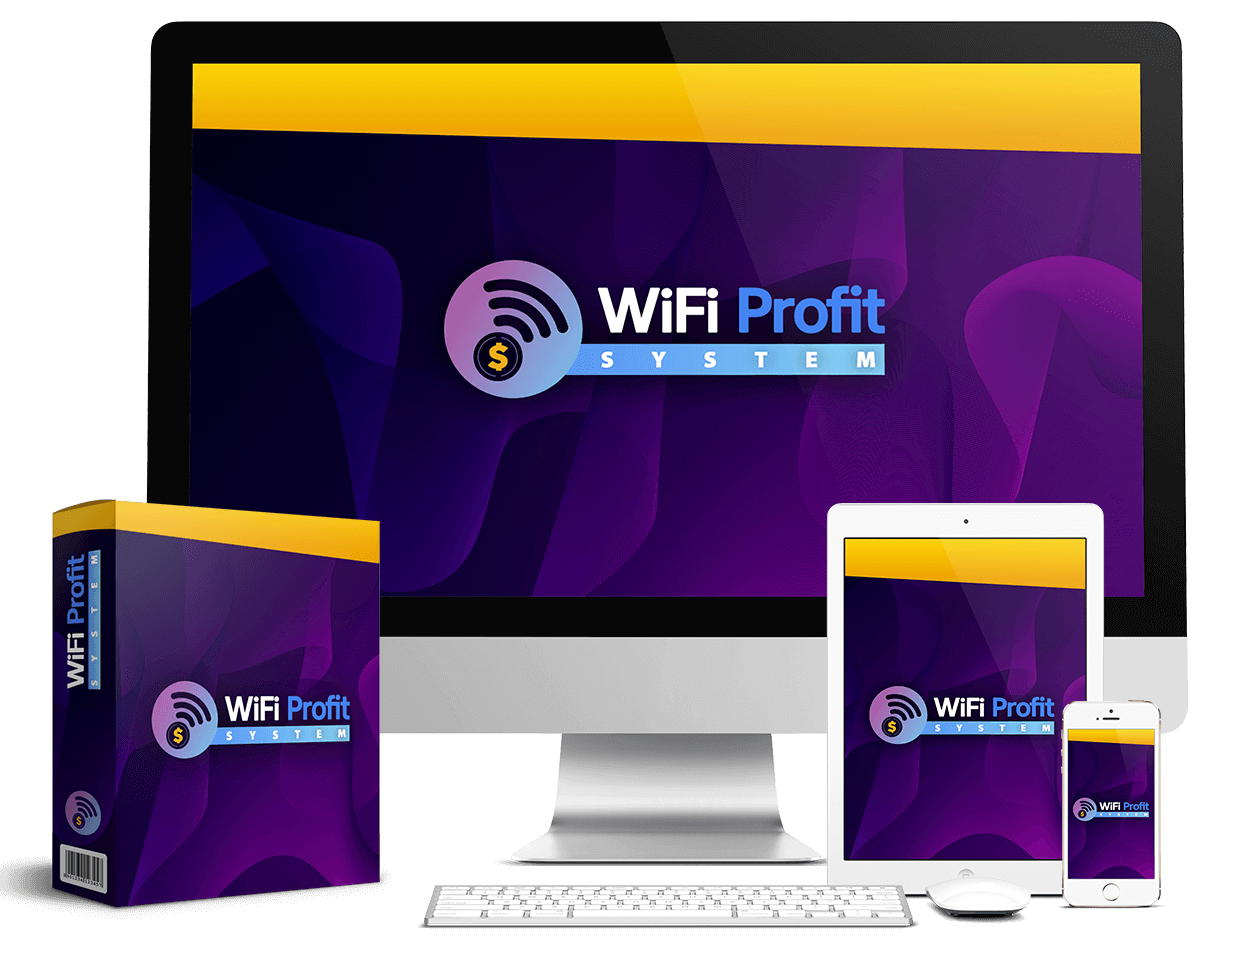 WiFi Profit System Review